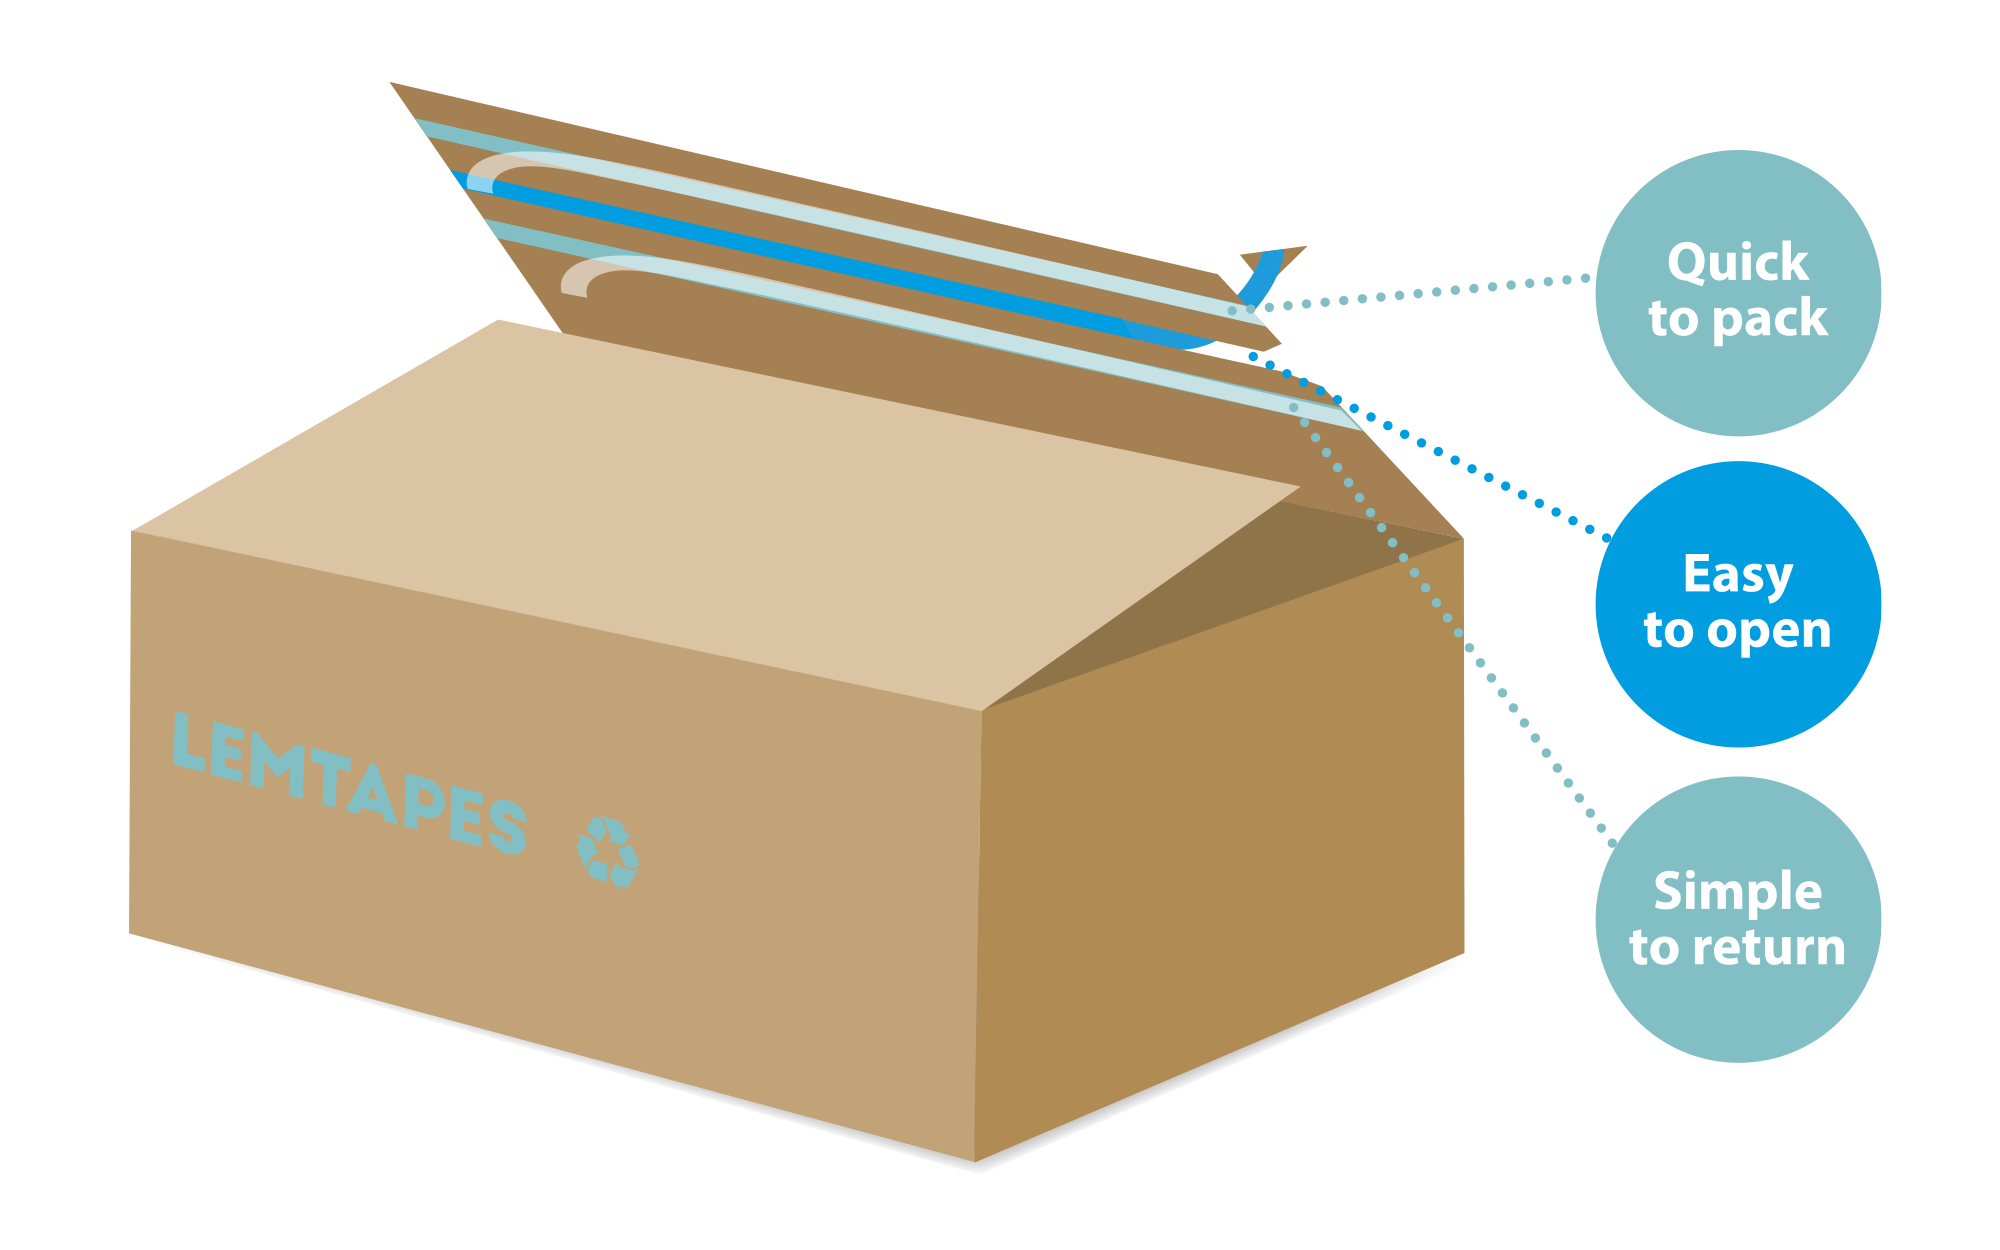 Graphic of Lemtapes three-tape e-commerce packaging solution – one tape for quick packing, one for easy opening, and one for simple returns.